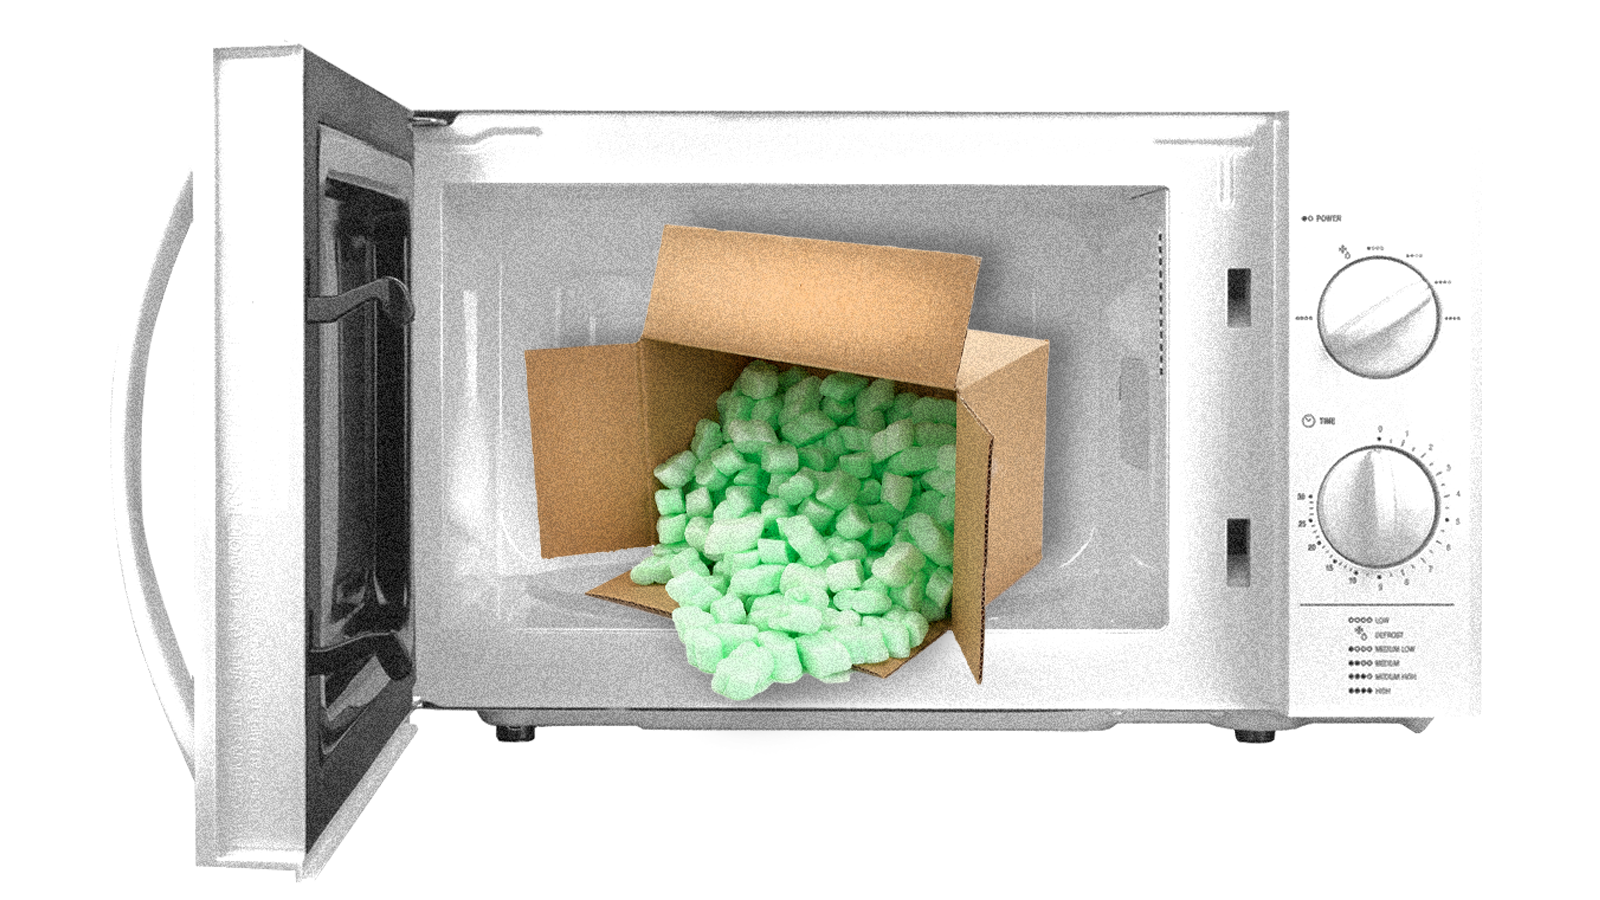 An open microwave with a box of polystyrene packing peanuts in it